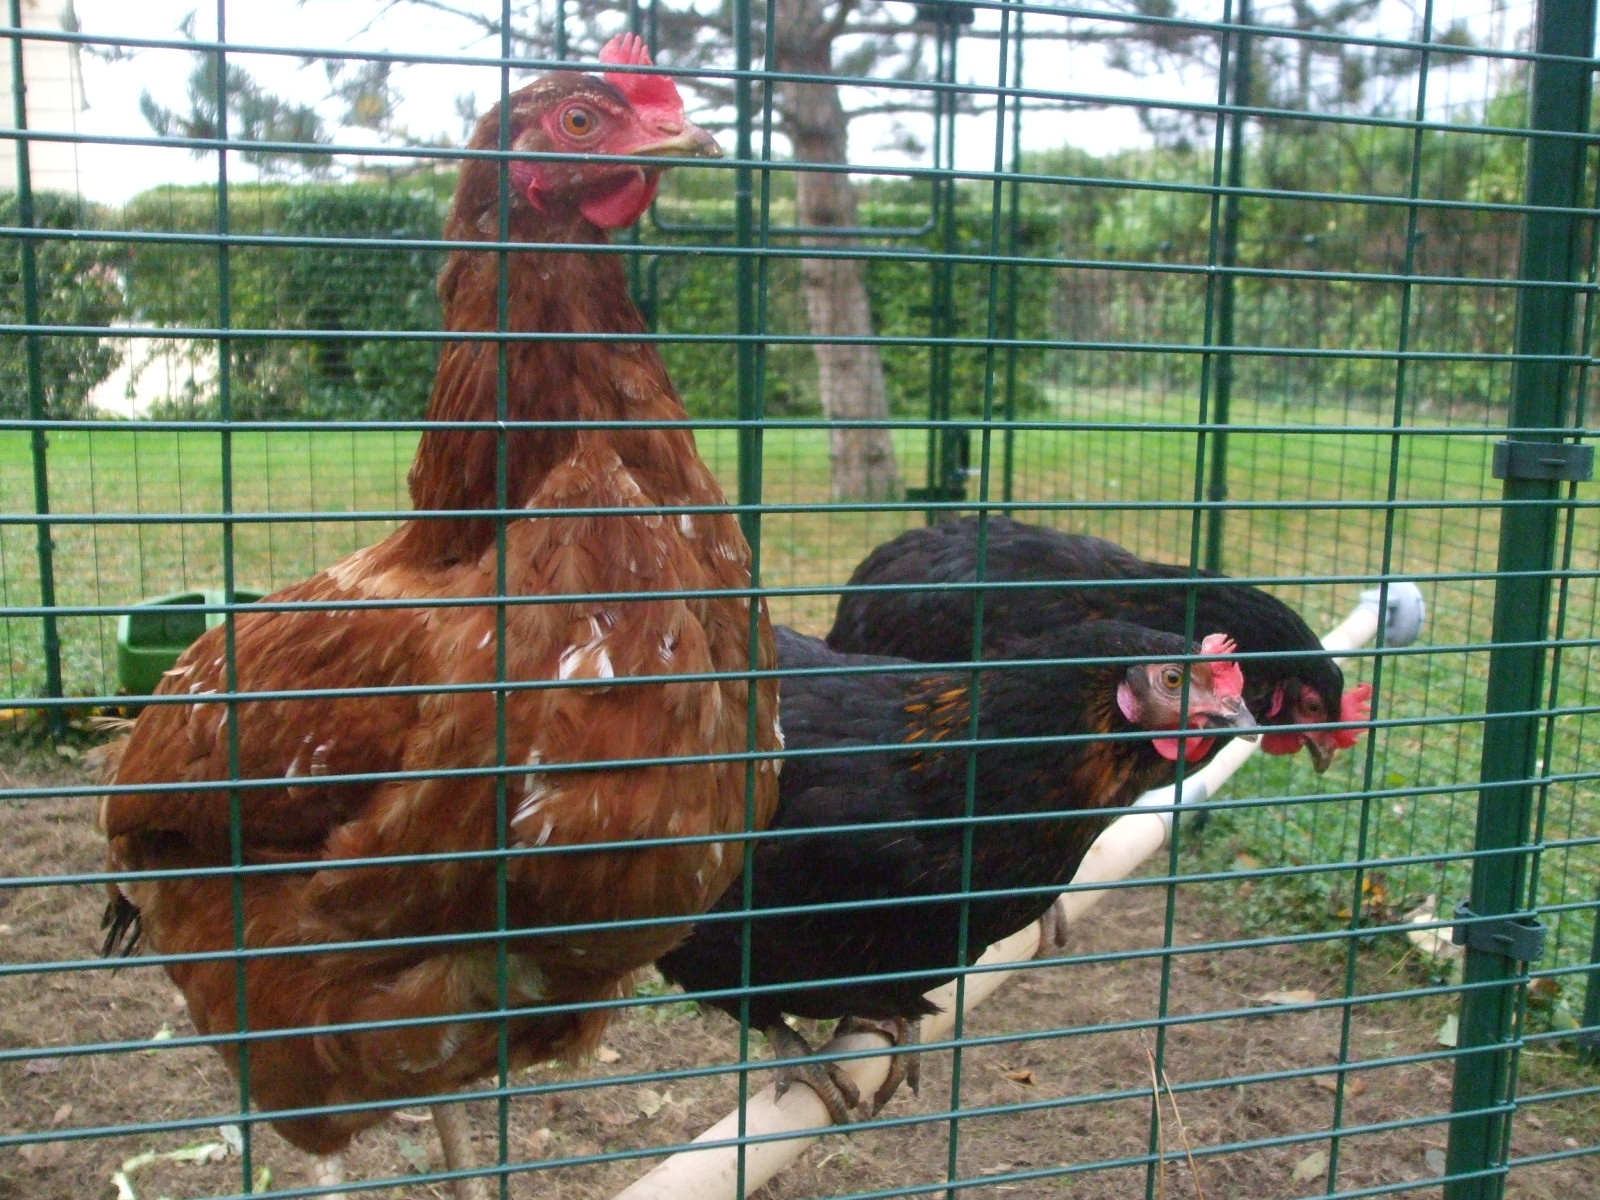 Three chickens perching on their wooden perch inside their enclosure